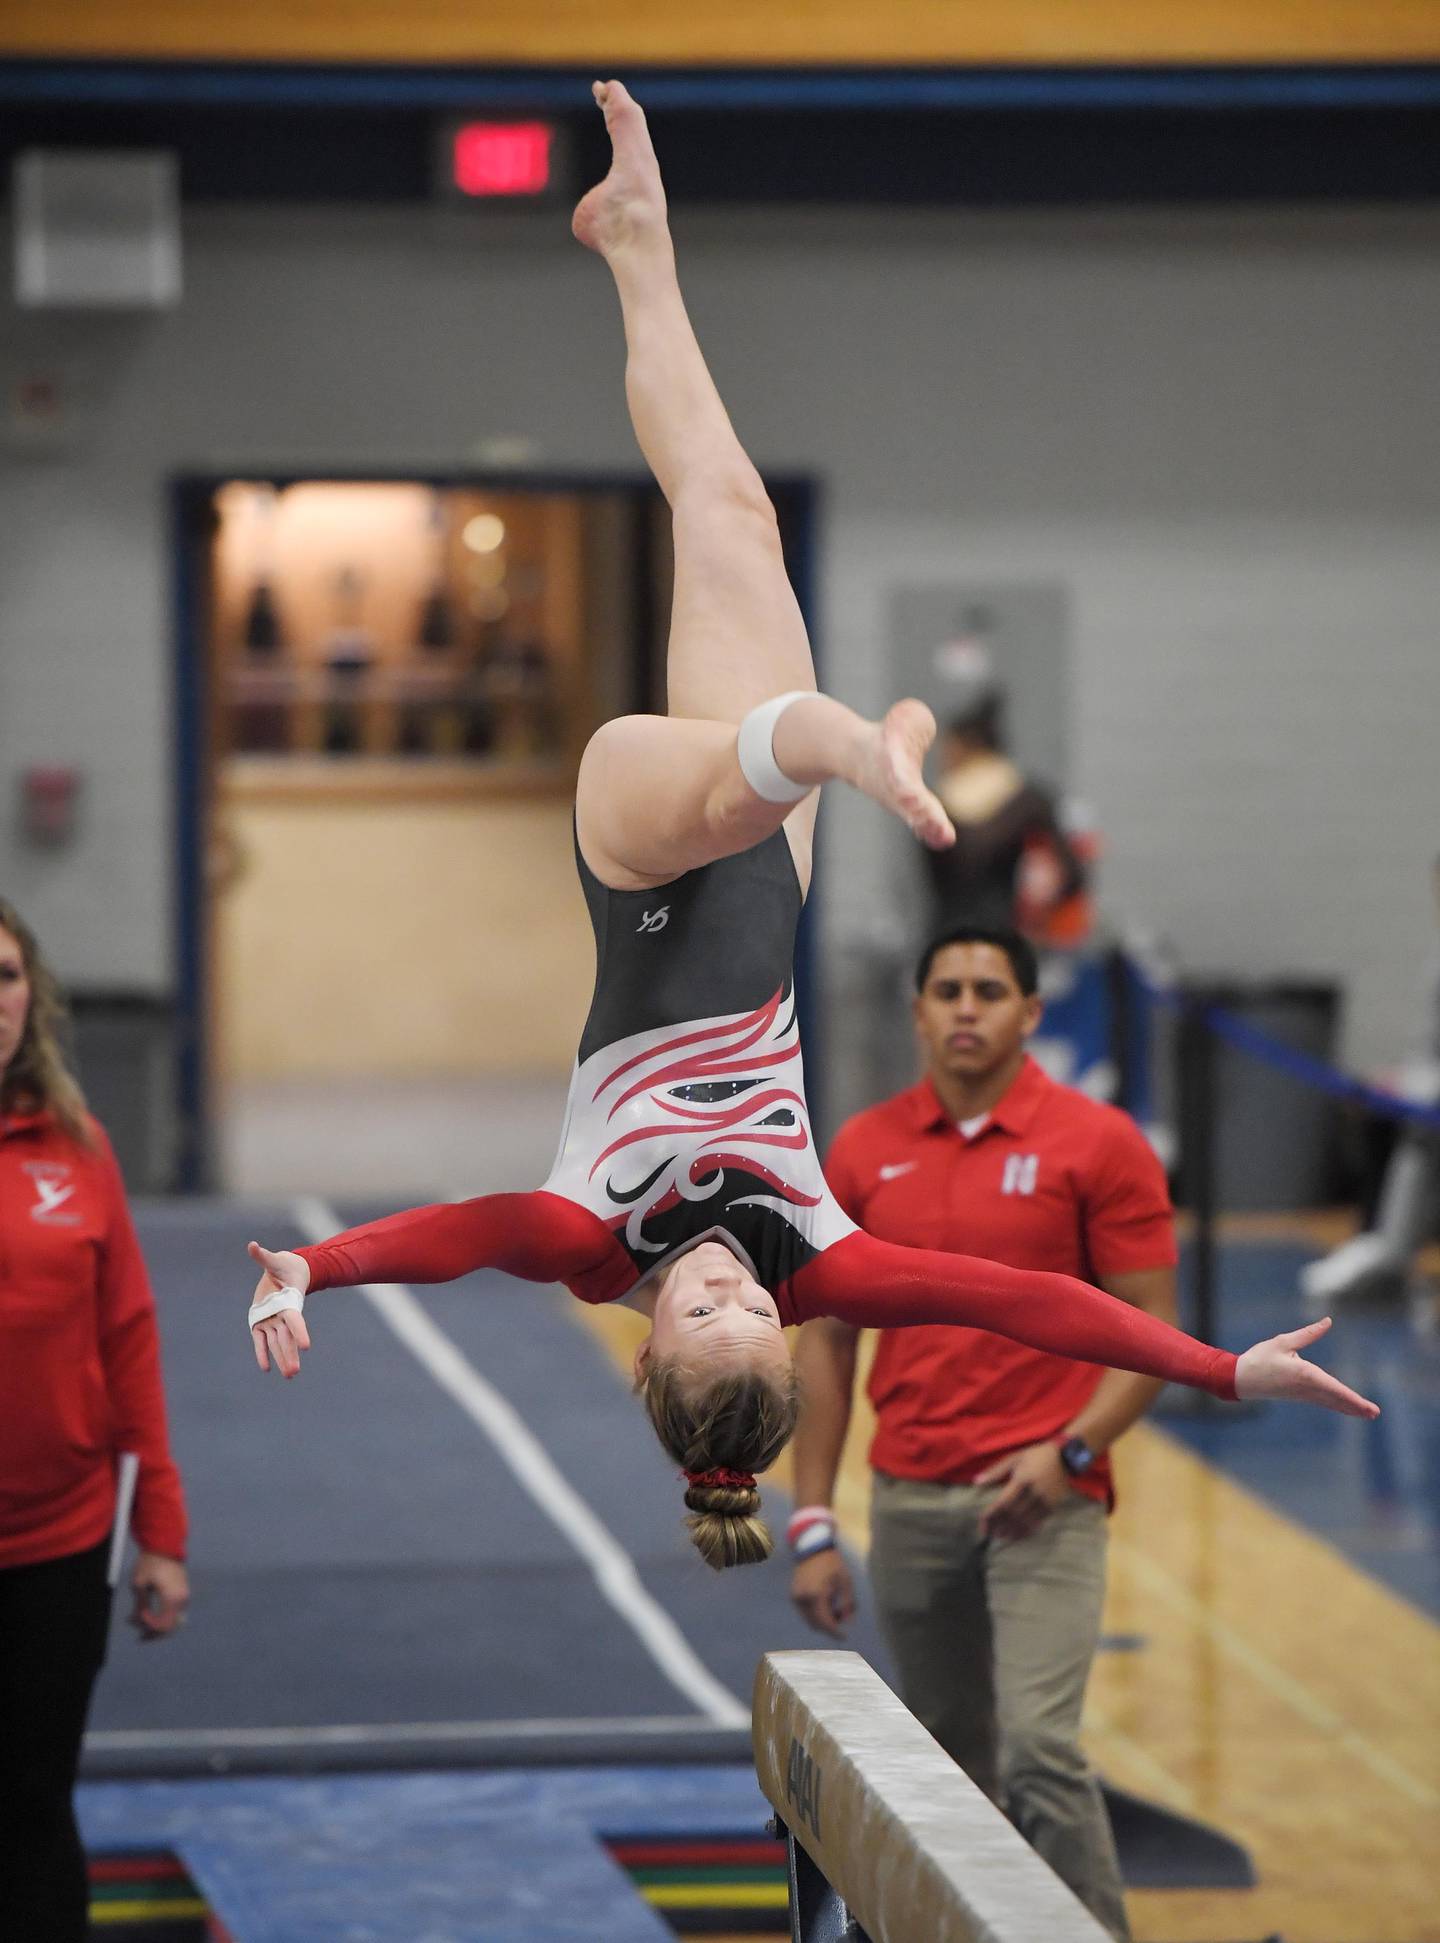 Naperville Central’s Alana Williams performs on the beam at the Geneva girls gymnastics regional meet in Geneva on Wednesday, February 1, 2023.